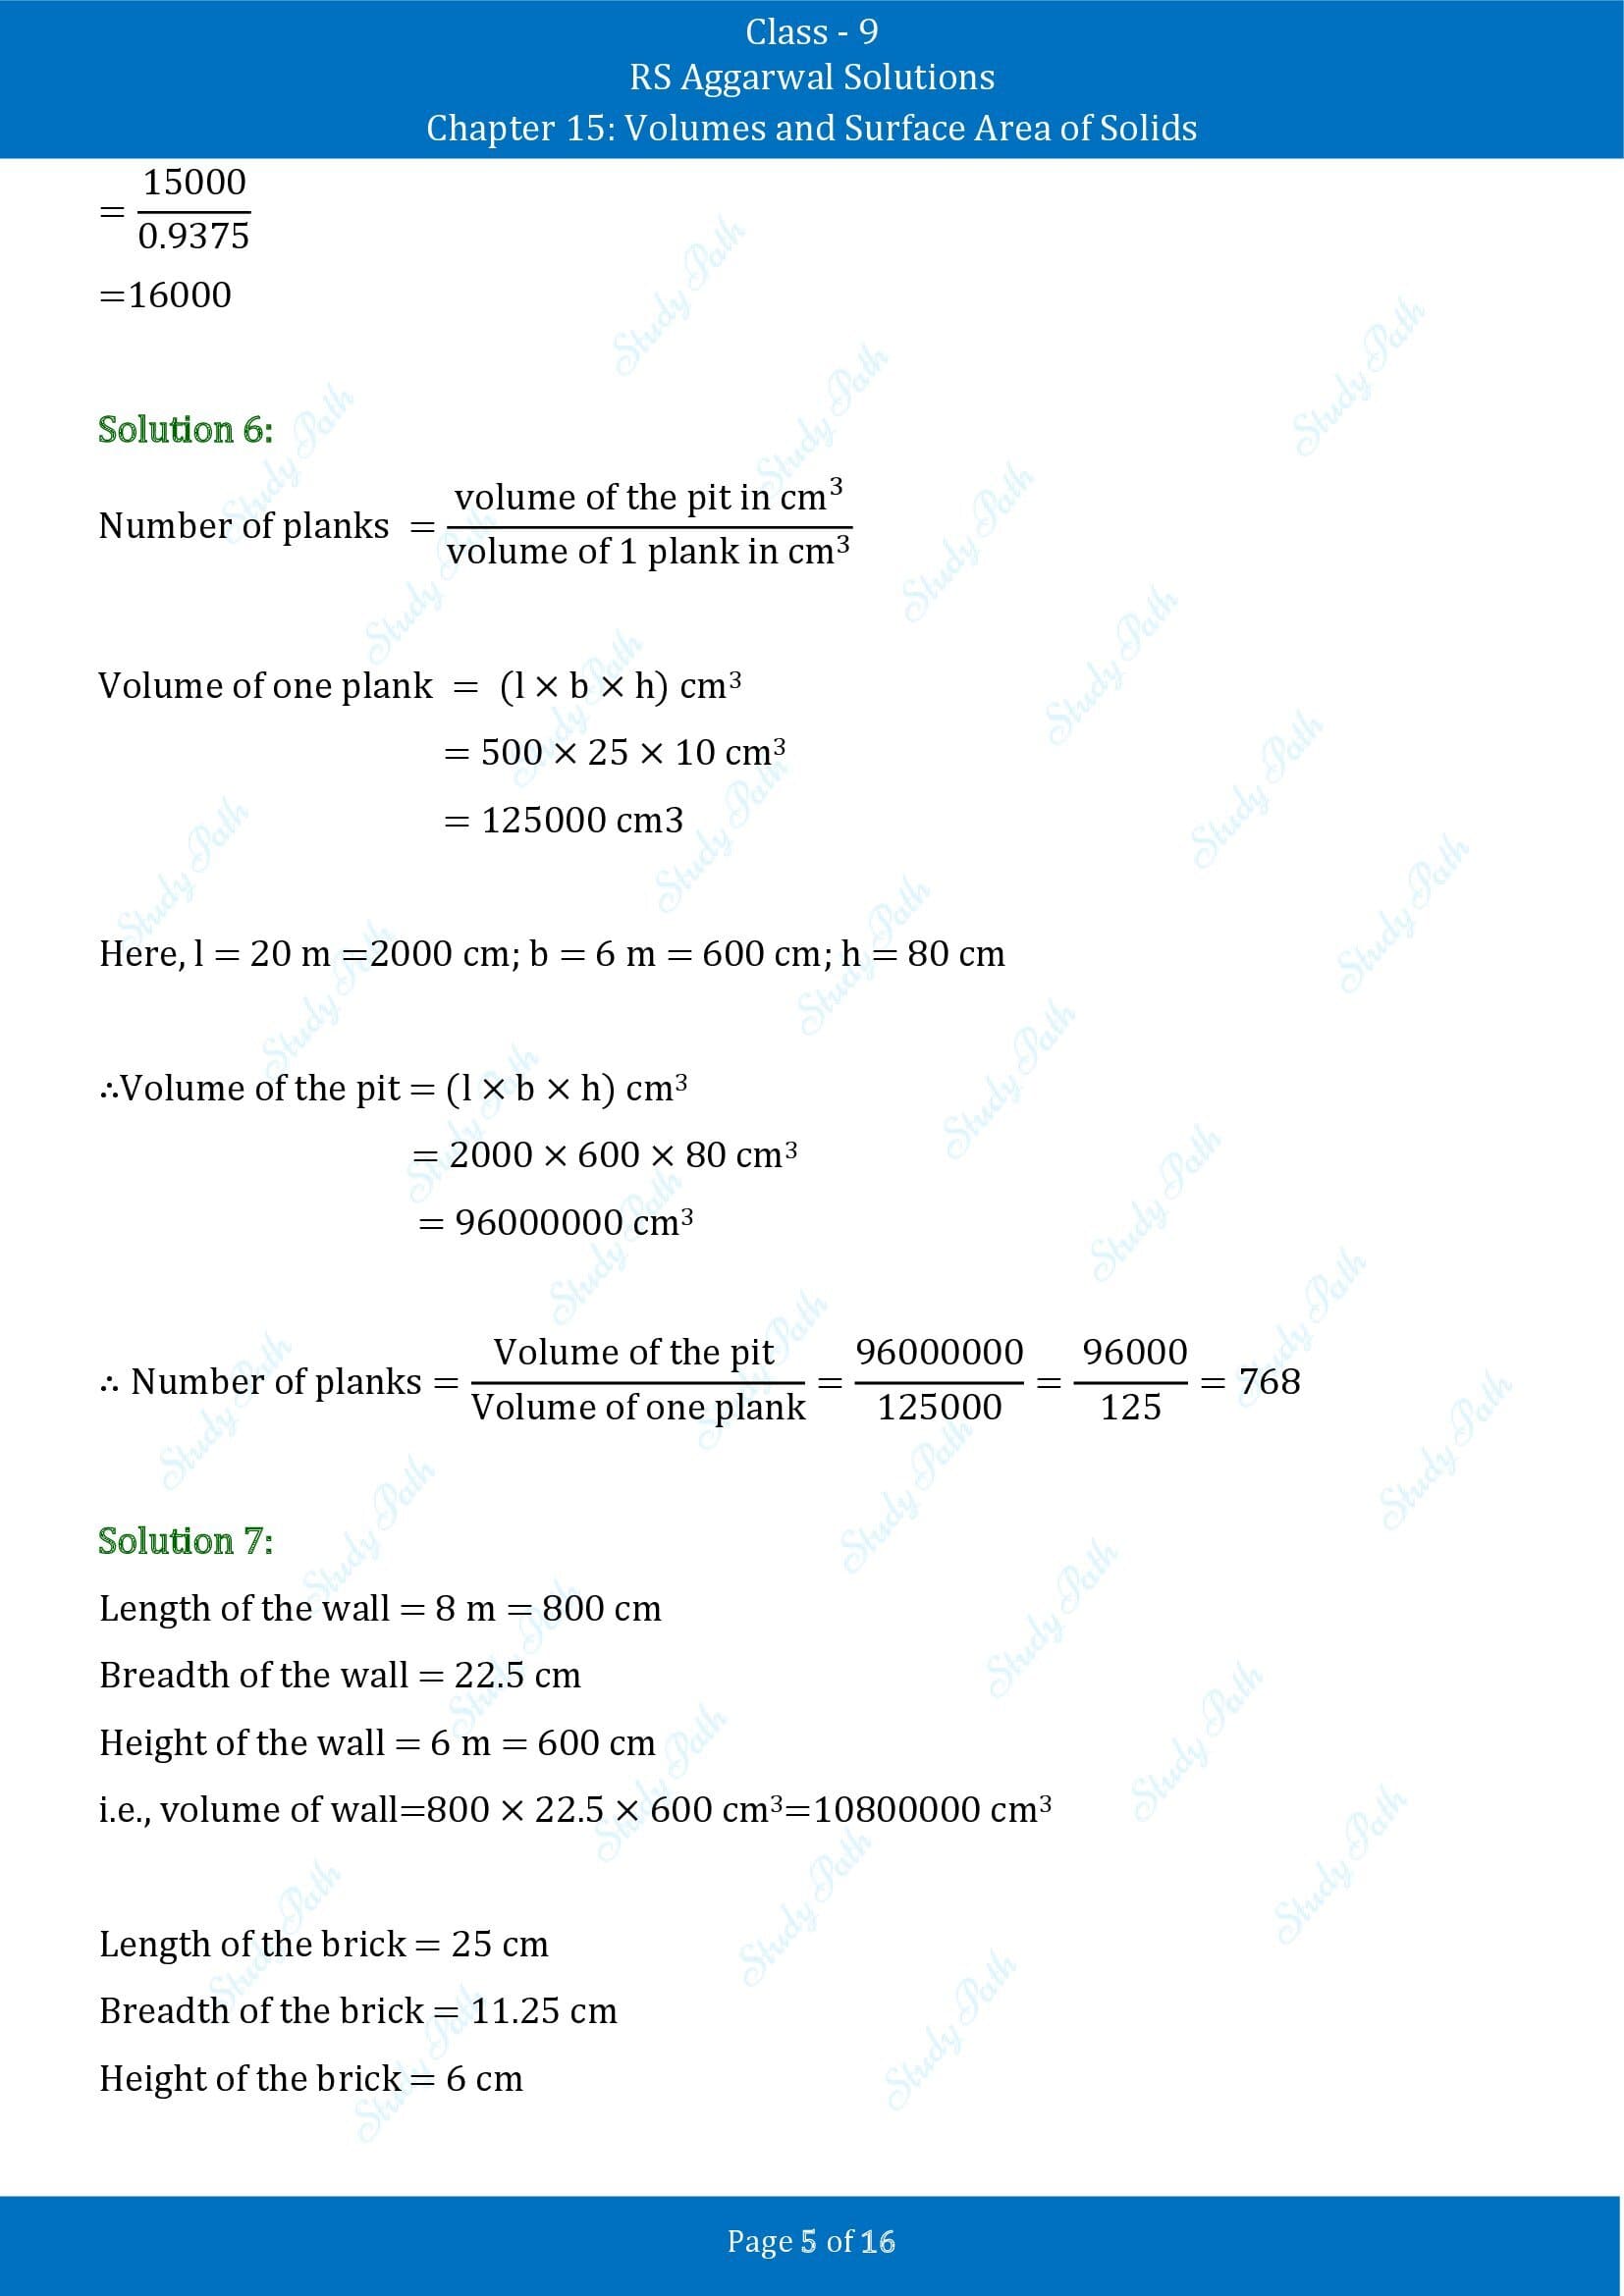 RS Aggarwal Solutions Class 9 Chapter 15 Volumes and Surface Area of Solids Exercise 15A 00005